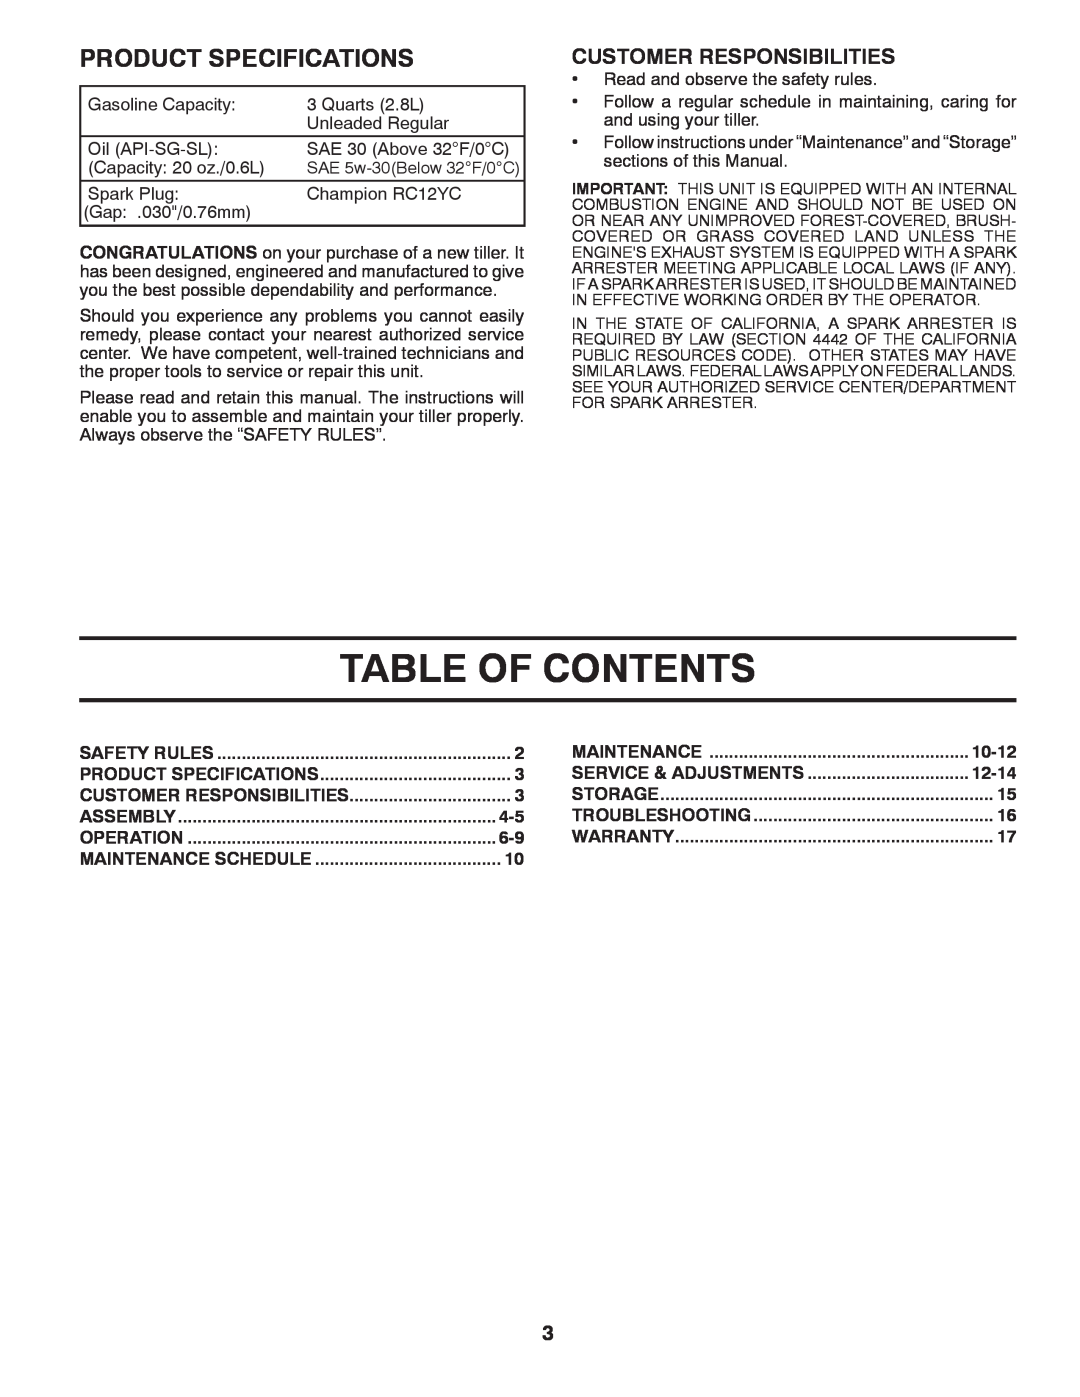 Poulan HDF825X manual Table Of Contents, Product Specifications, Customer Responsibilities, 10-12, 12-14 